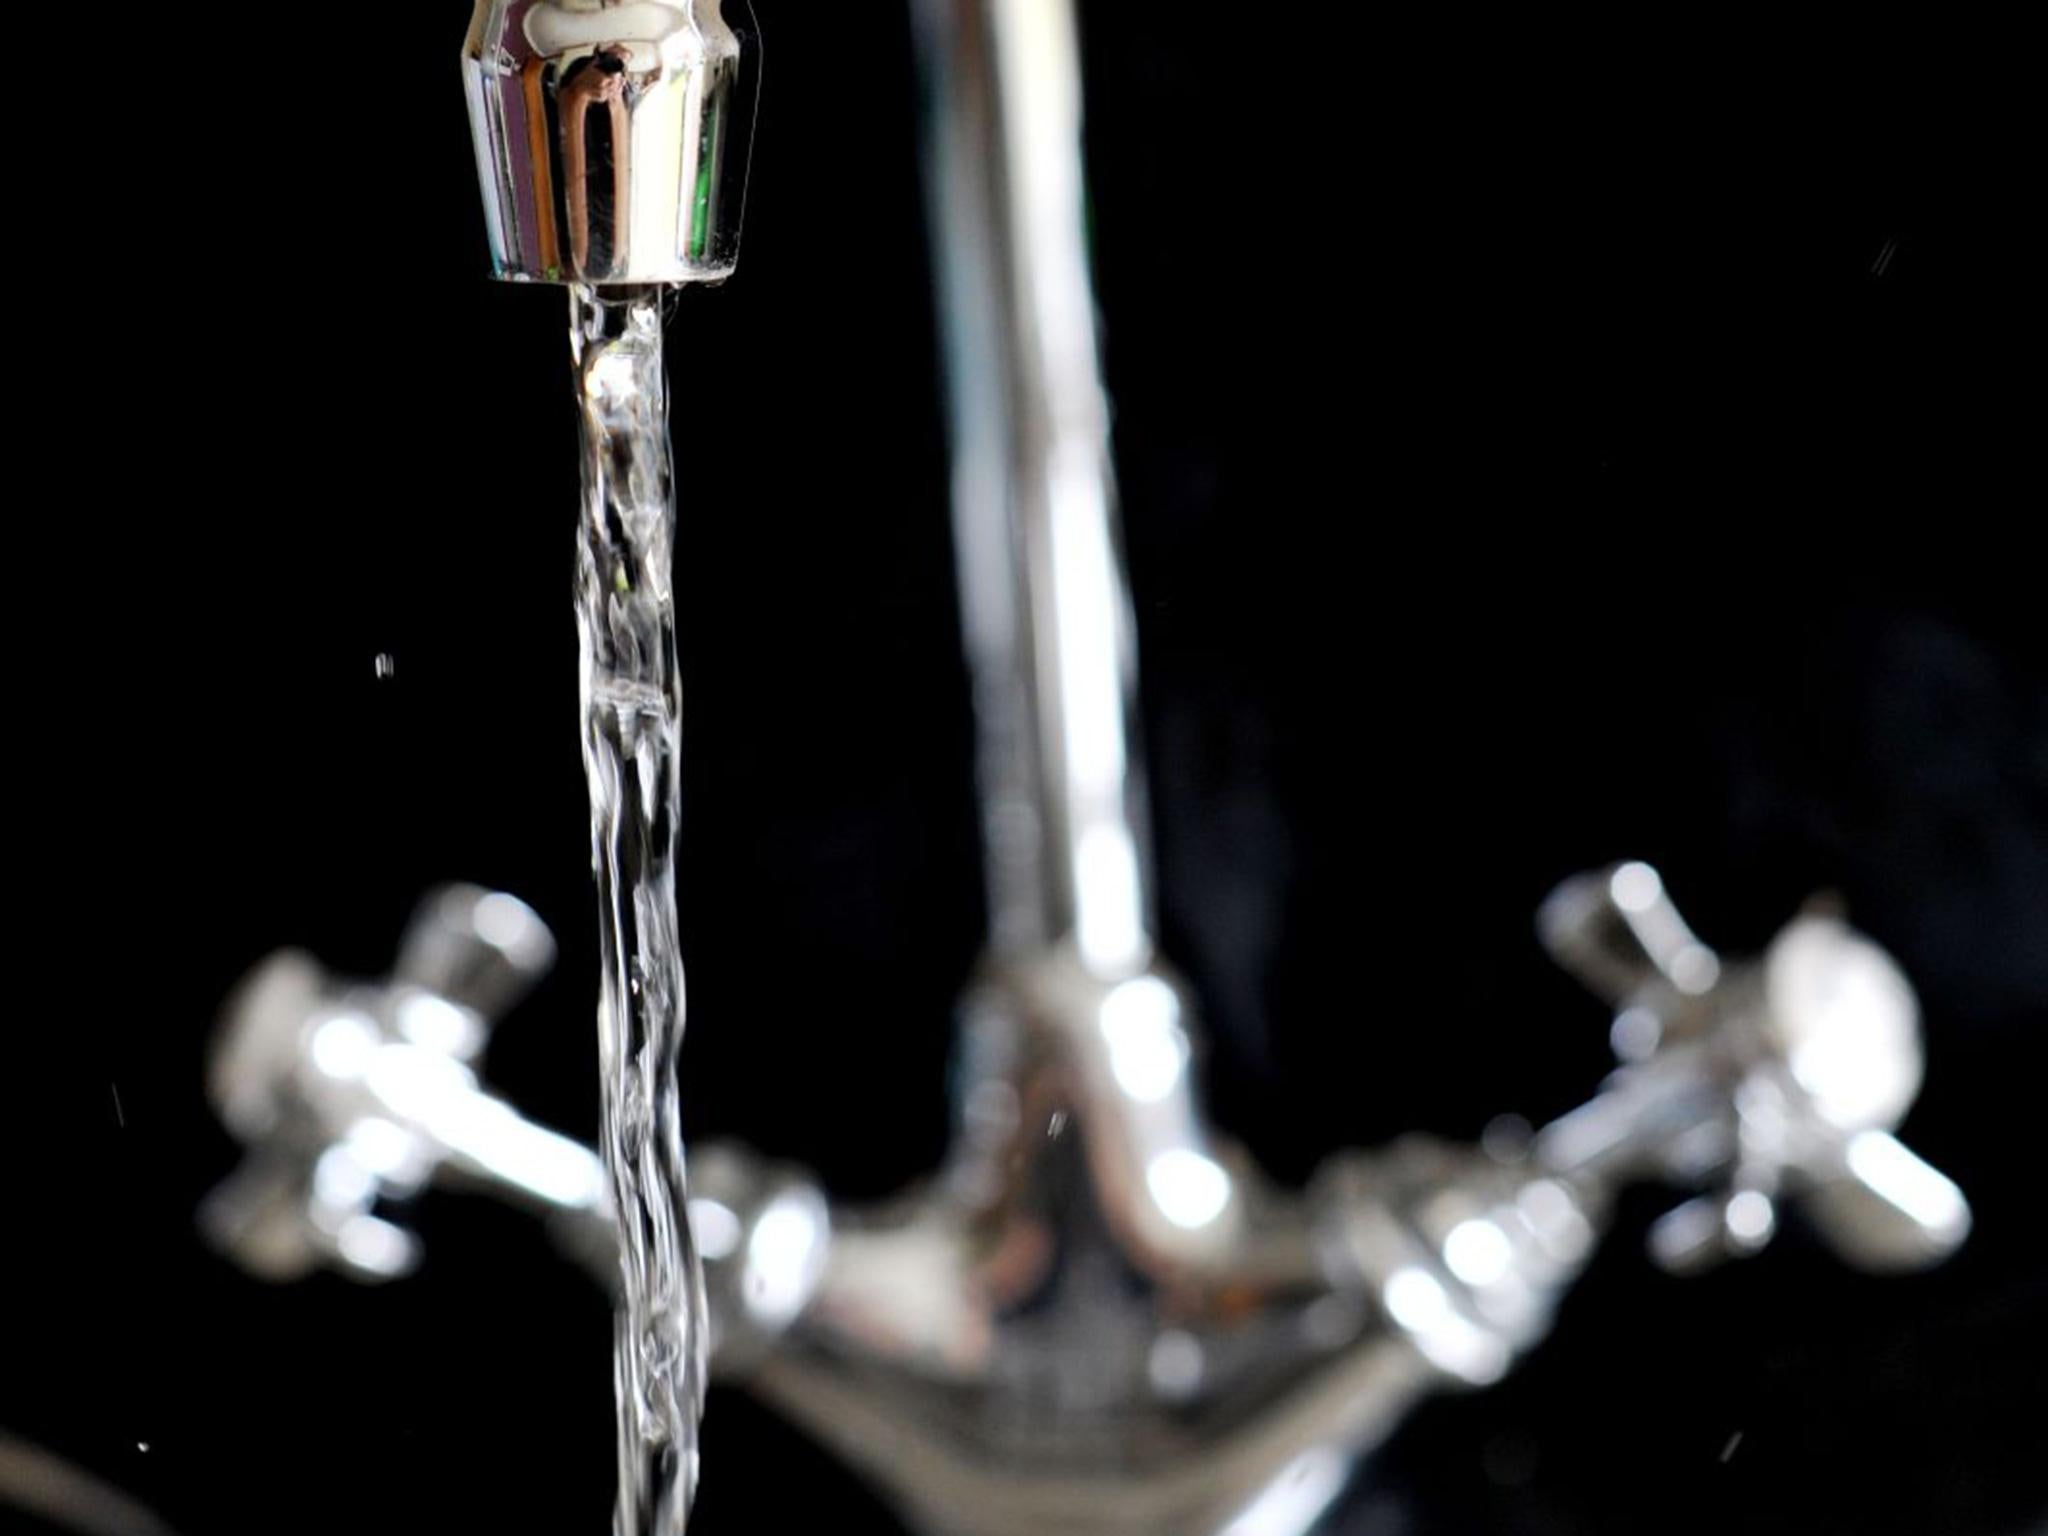 More than 300,000 homes in Lancashire were advised to boil their tap water